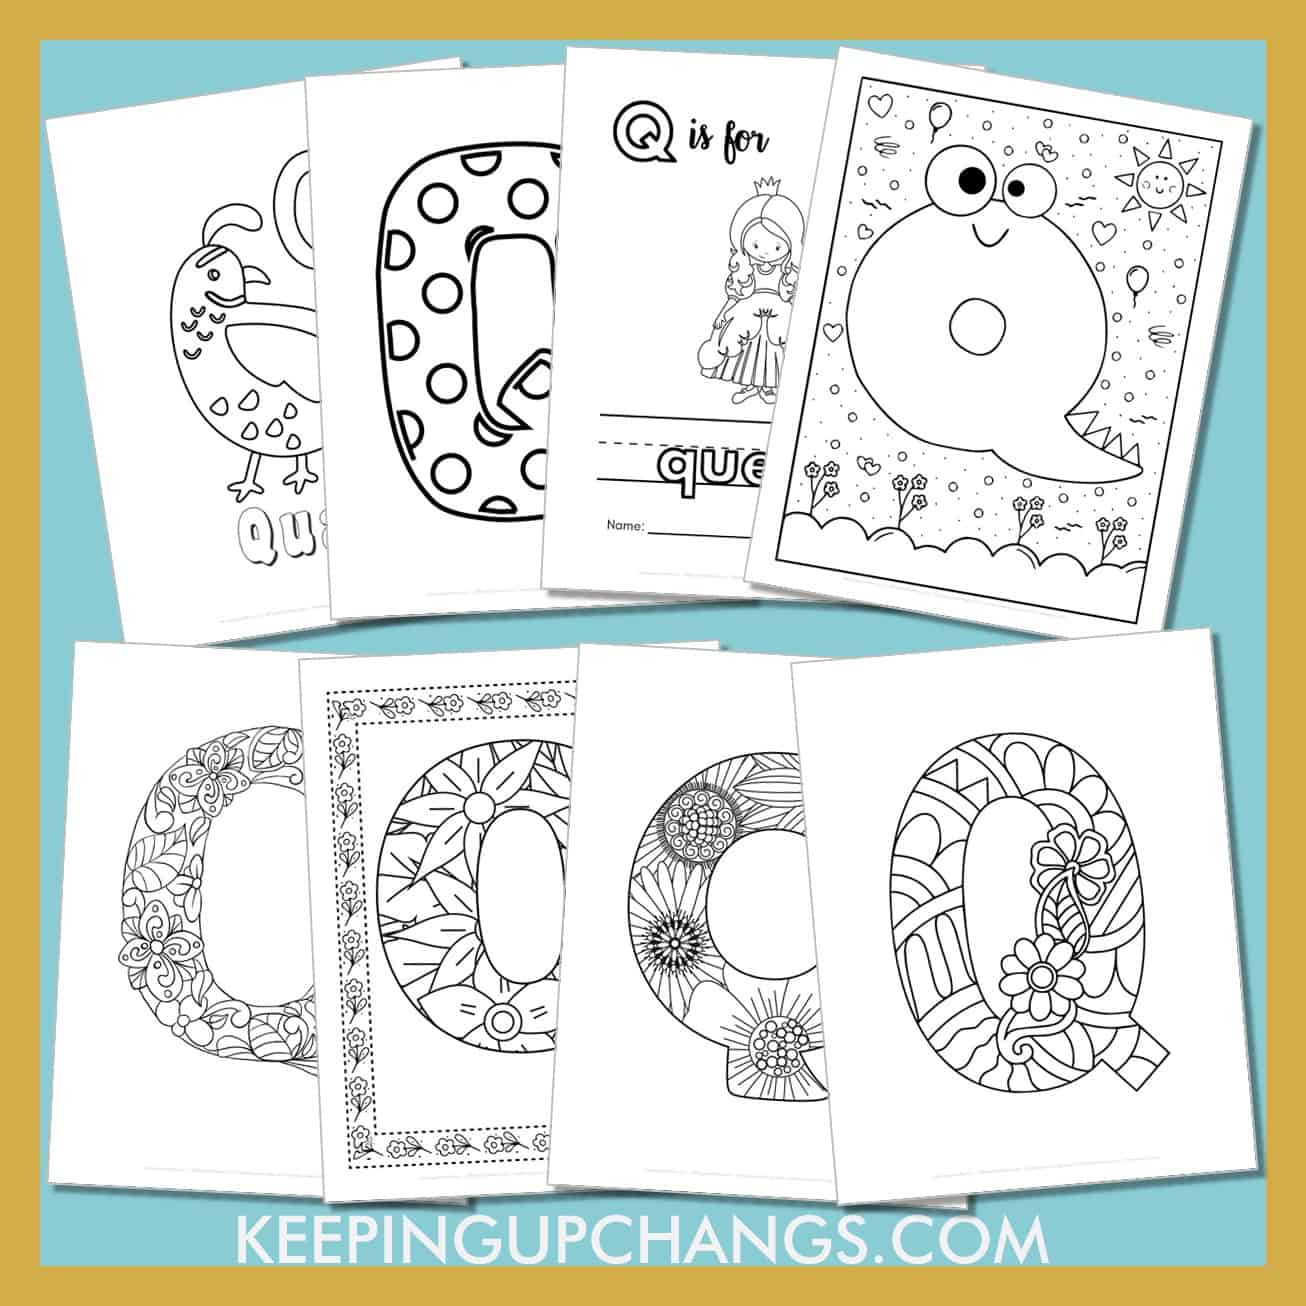 free alphabet letter q to color for toddlers, preschool, kindergarten, to adults.